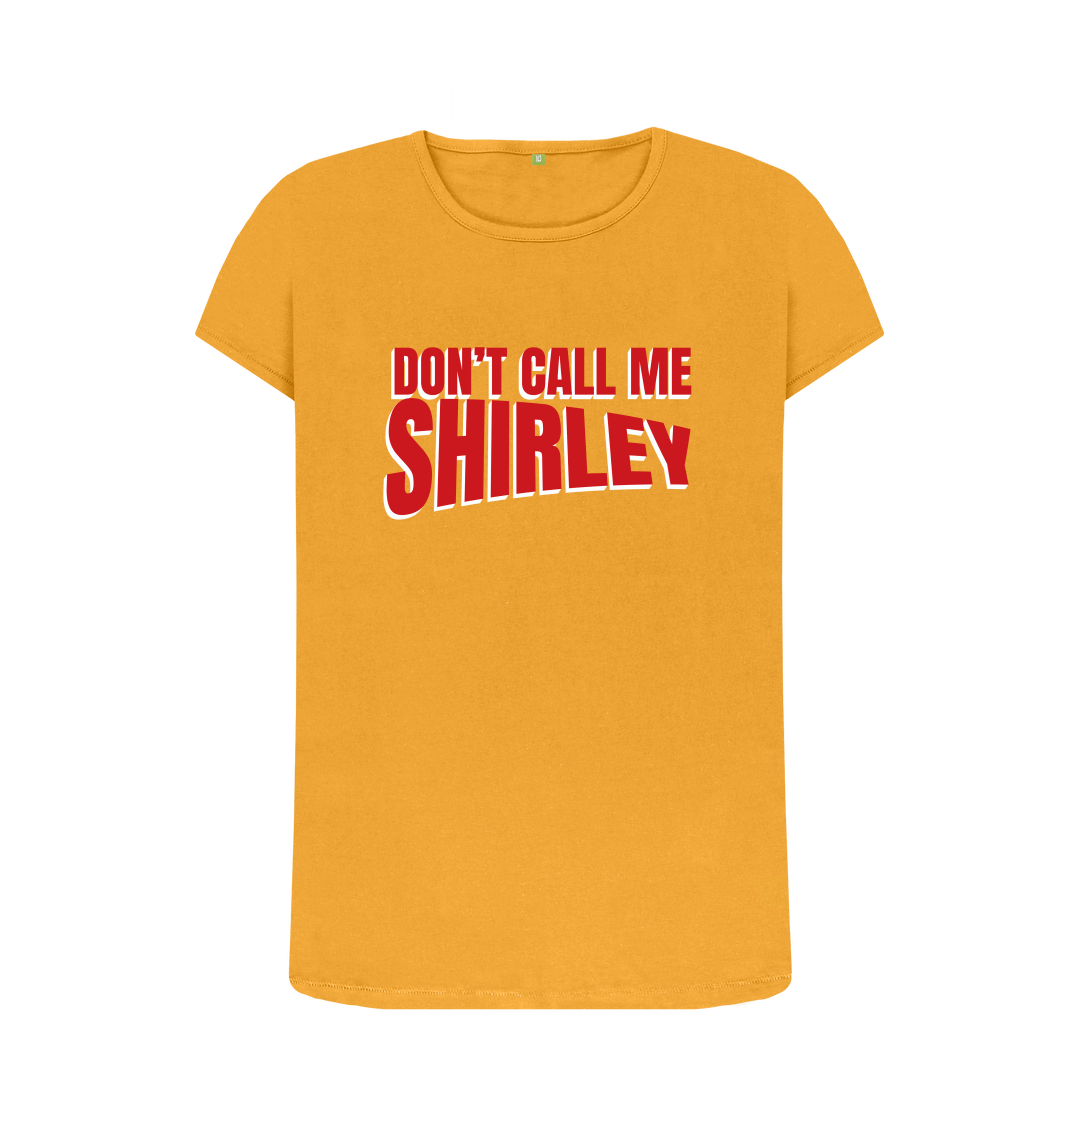 I Am Serious , And Don't Call Me Shirley. T Shirt 100% Cotton